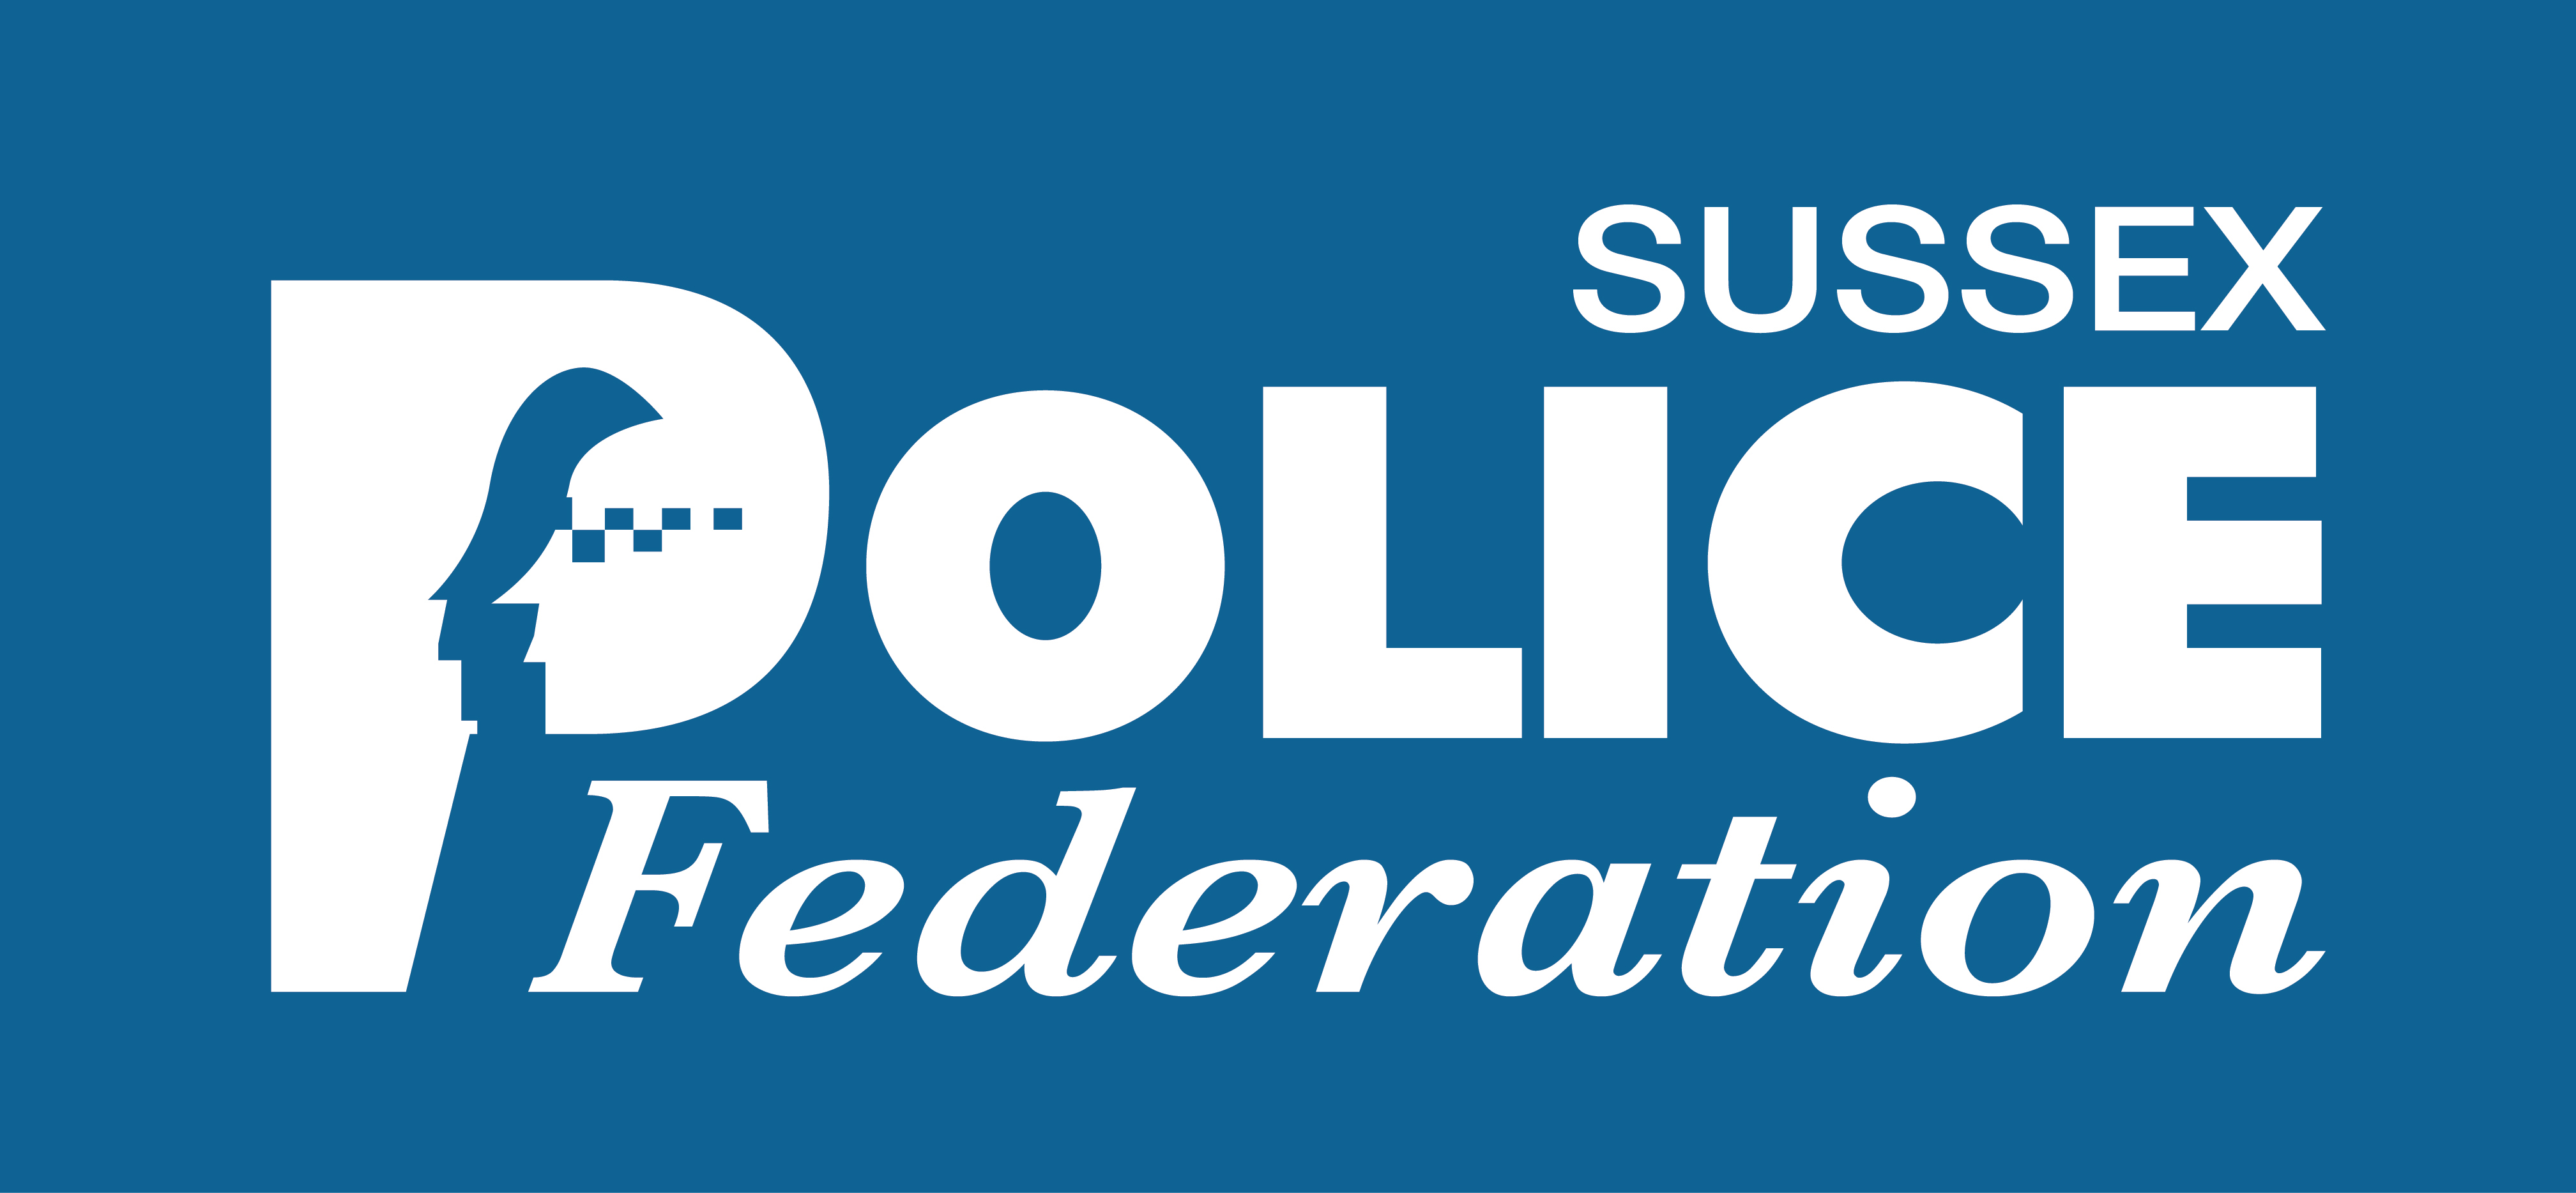 Sussex Police Federation